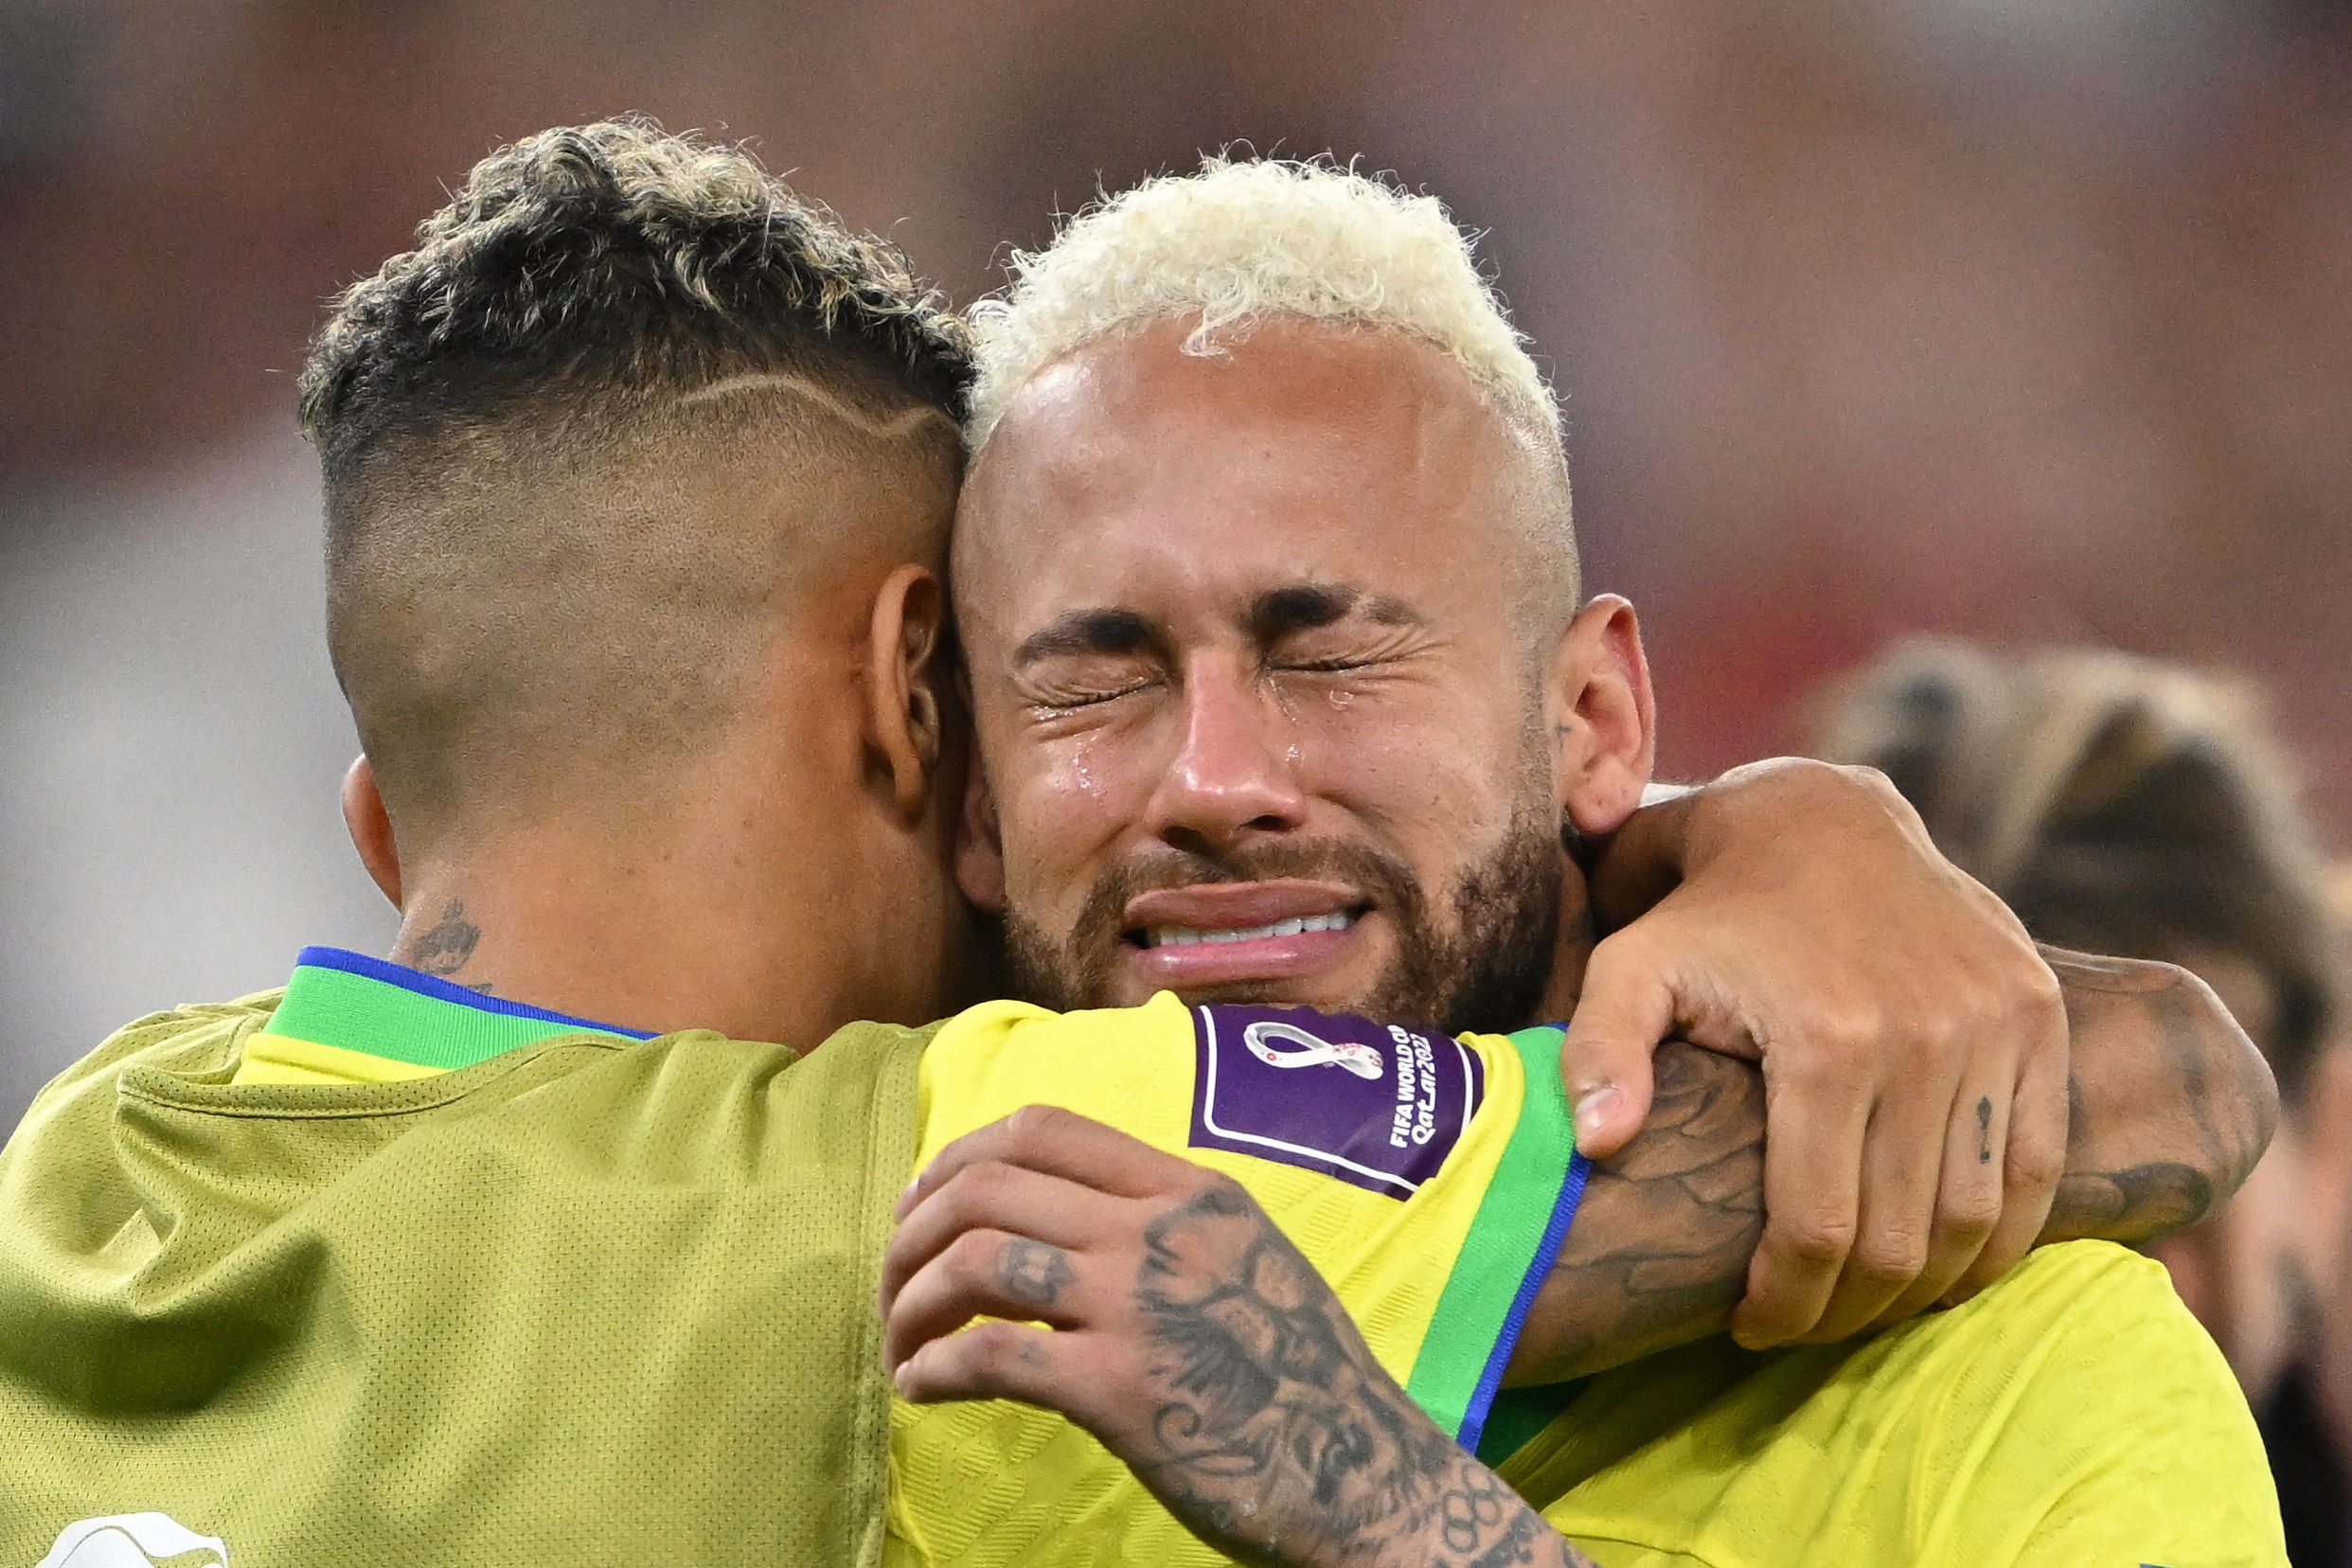 Brazil’s Raphinha comforts teammate Neymar as he cries following their team’s defeat in the World Cup quarter finals on Saturday. Photo: dpa